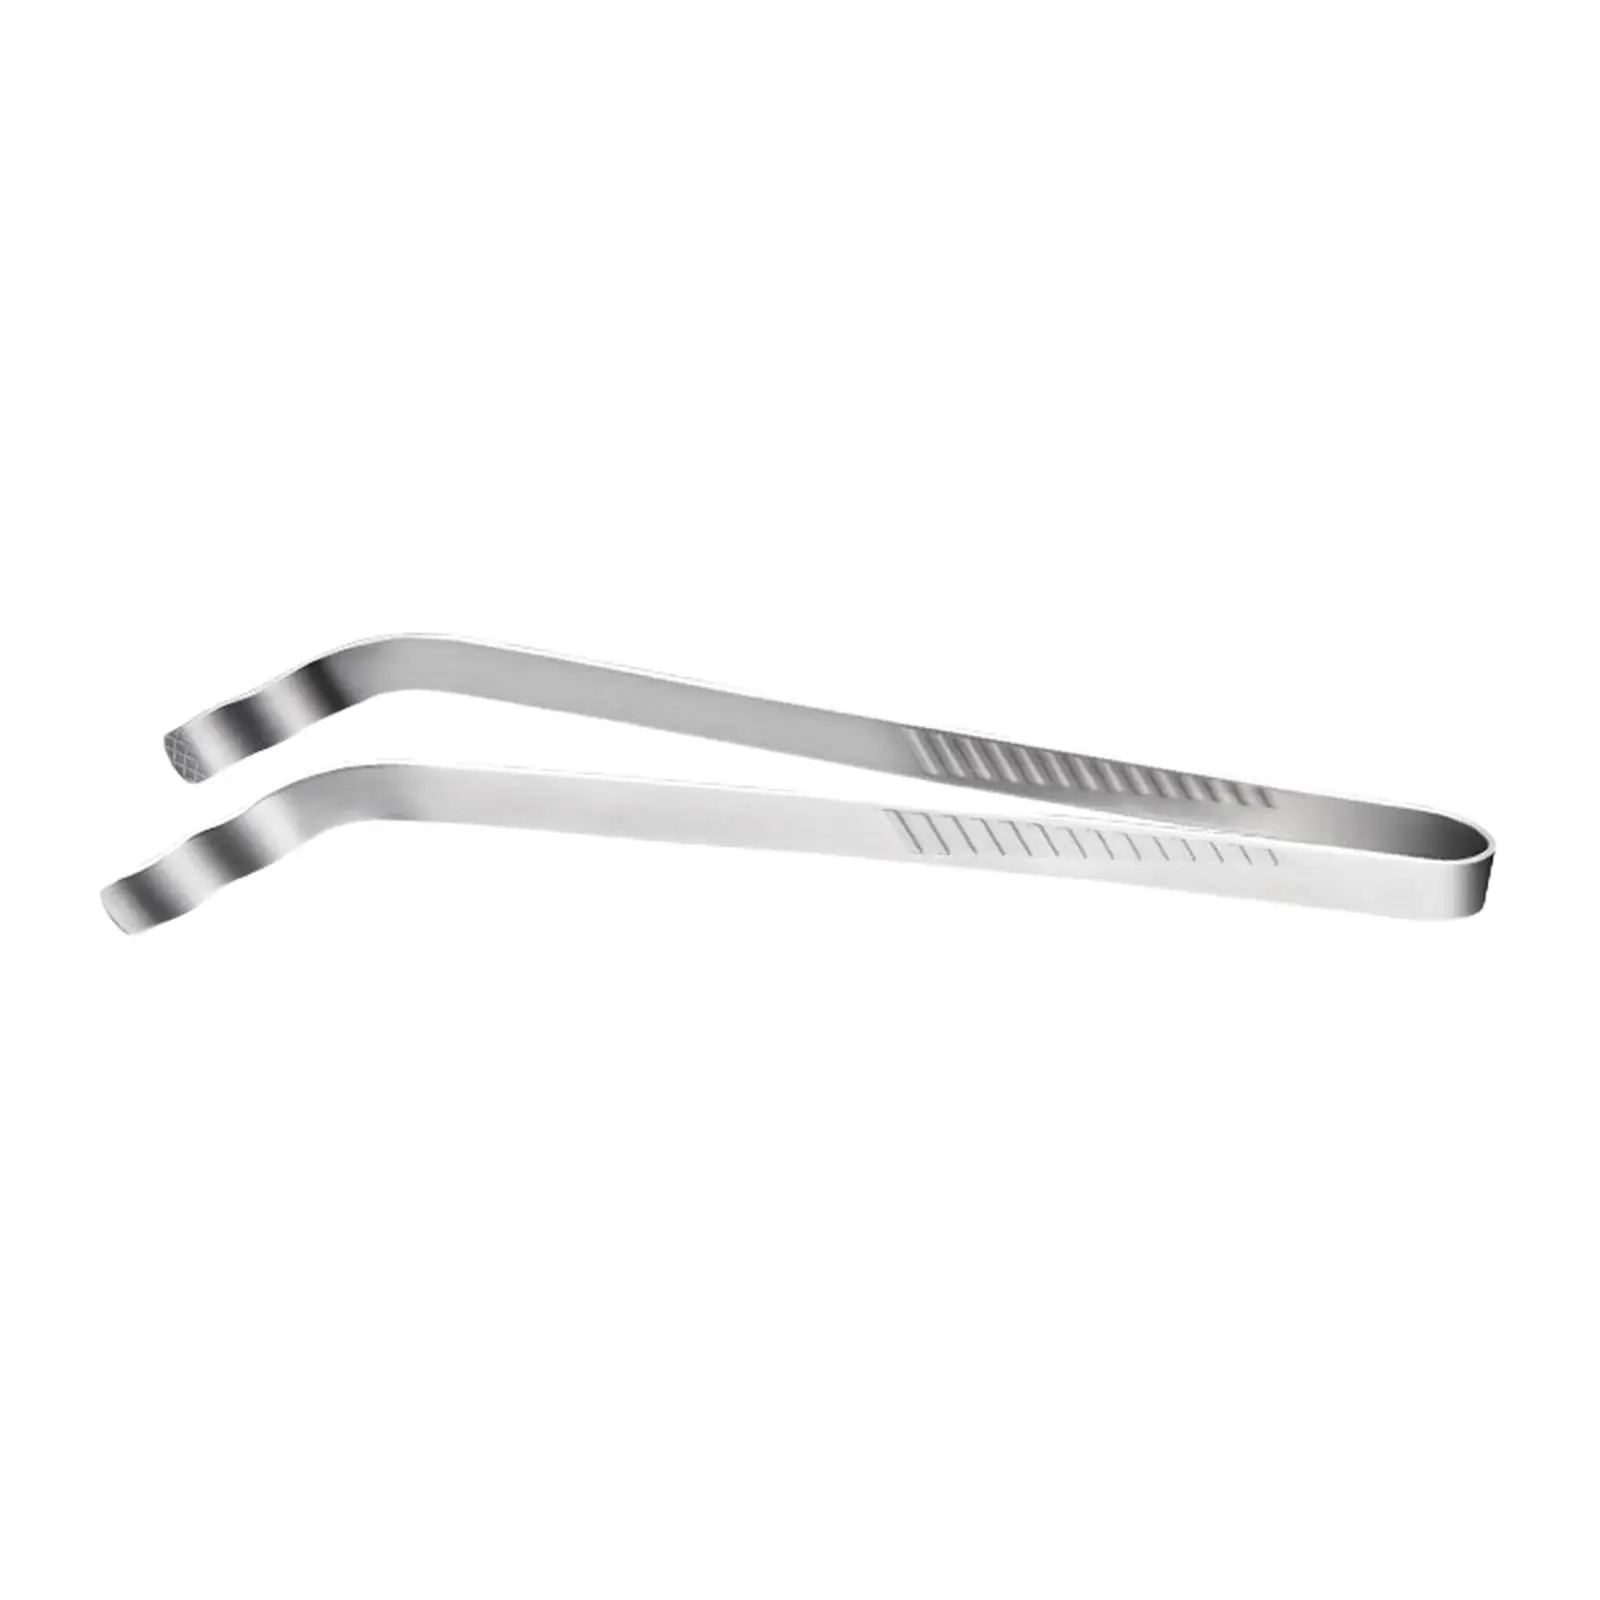 Steak Tongs Serving Tongs Long Handle Kitchen Utensils Kitchen Cooking Tool Kitchen Tongs for Salad Bread BBQ Noodles